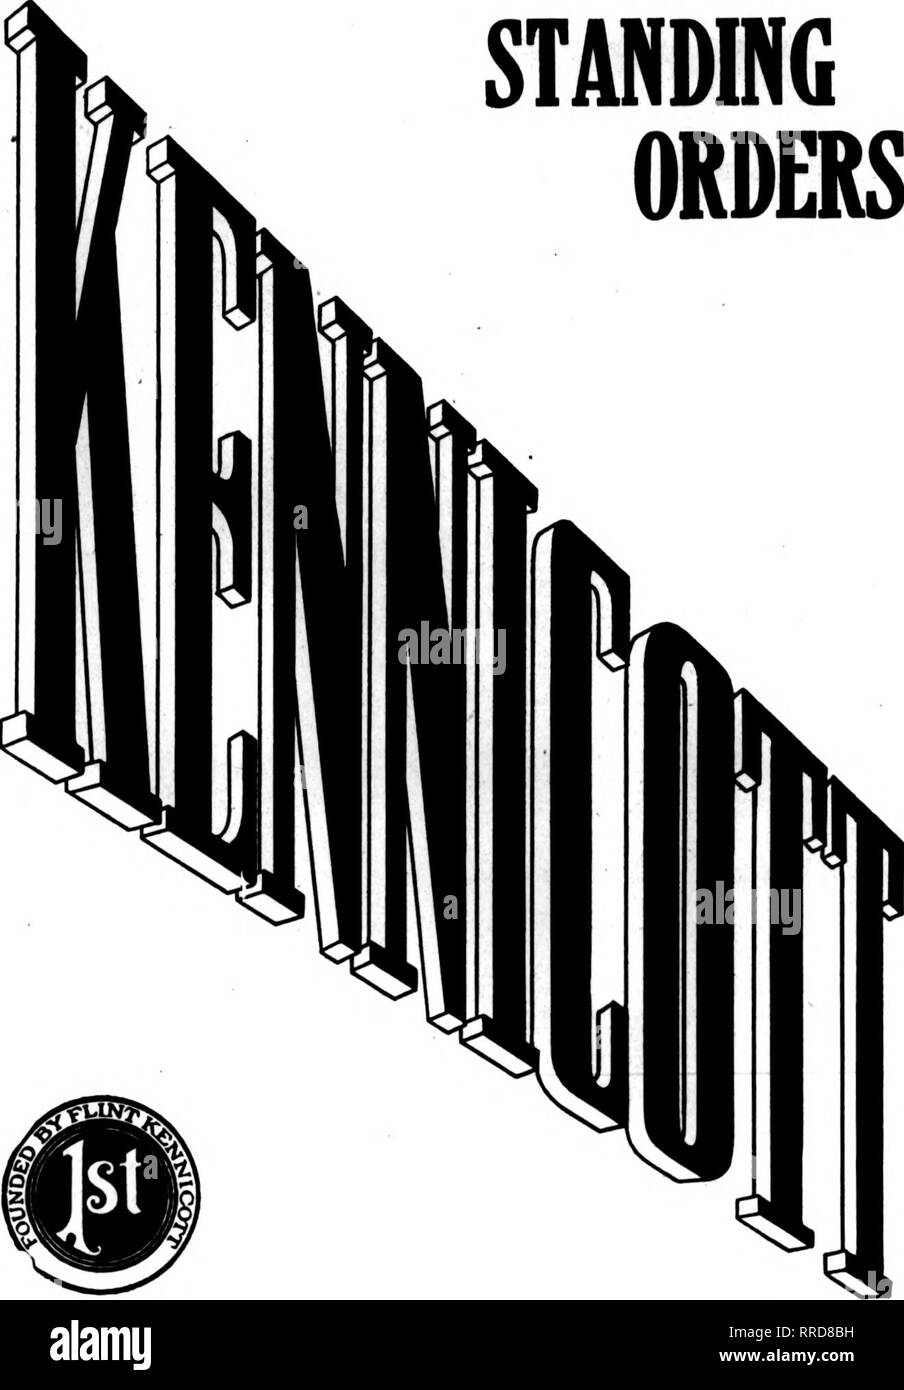 . Florists' review [microform]. Floriculture. 42 The Rorists^ Review NOVEMBIH 24, 1921 George Wienhoeber, labeled inconspicu- ously, &quot;Grown by Illinois Plant Co.,&quot; which is the Batavia greenhouse enter- prise of A. Henderson, in direct charge of Tom Conlon. Here's an interesting little story from the Herald-Examiner of November 17: '' Three gypsy women entered the Weiland-Risch flower store yesterday. 'Outside,' said Edward Schultz, an em- ployee, 'I don't want my fortune told.' As the trio departed one of them said, 'Something tells me you're going to lose something.' A moment later Stock Photo